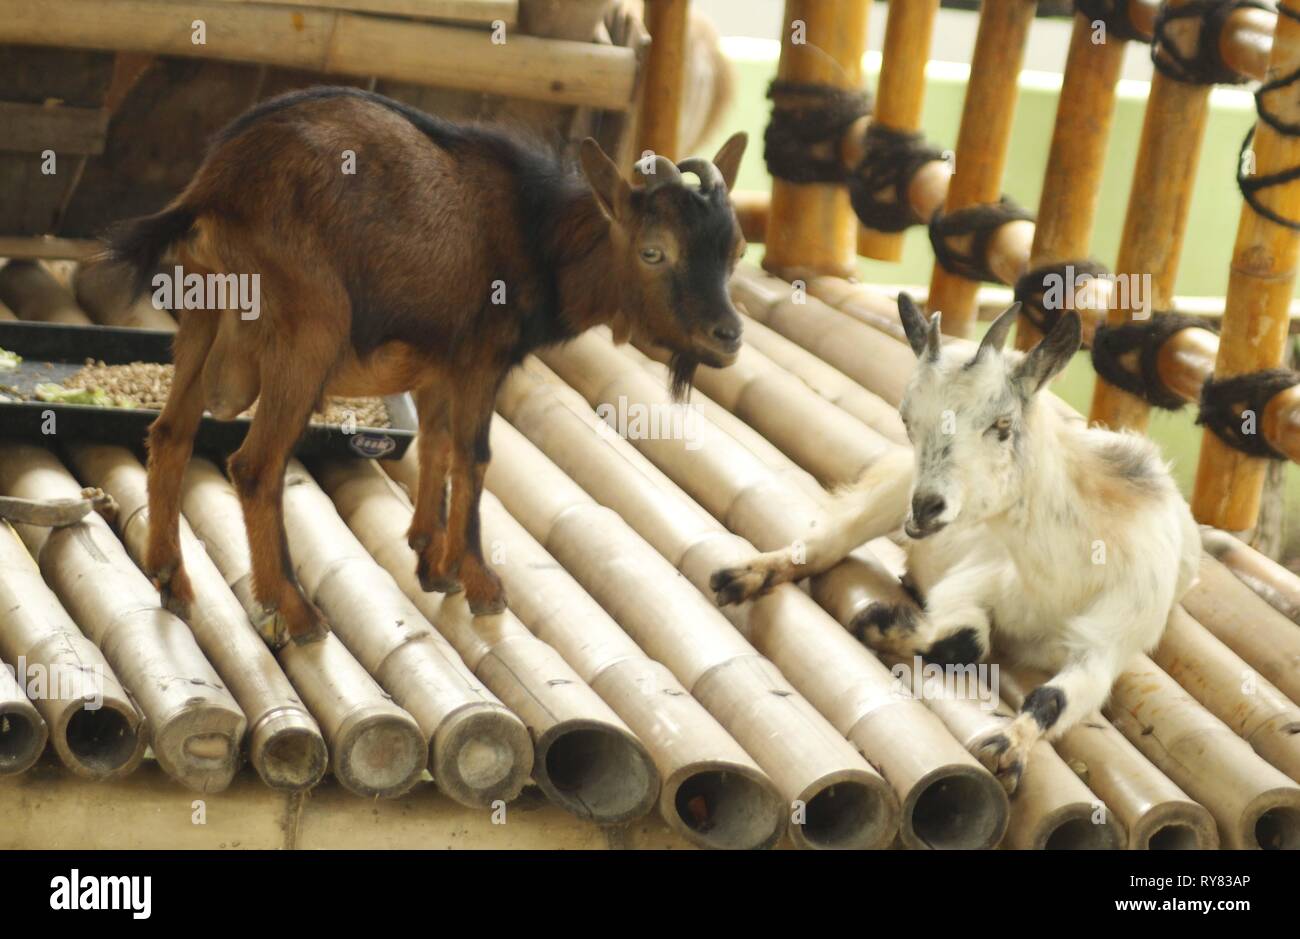 Seen two praha goats or more familiar Czech dwarf goats are in the mini zoo  animal cage Madiun Umbul Square Tourism Park. The management continues to  add various animals to complement the